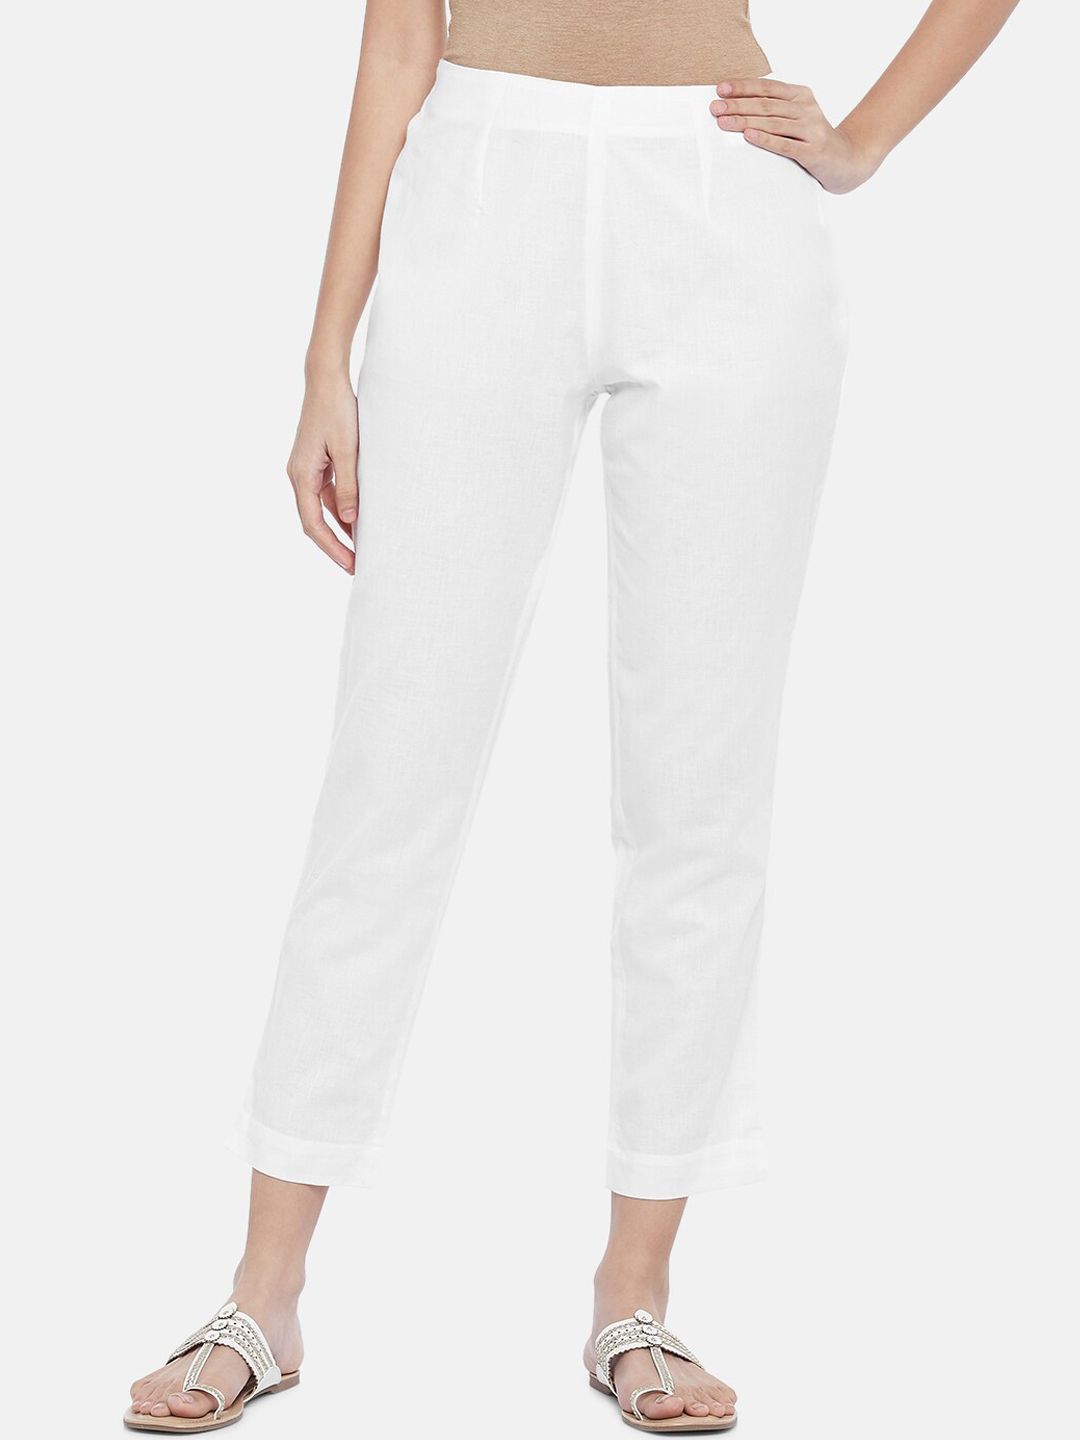 RANGMANCH BY PANTALOONS Women White Trousers Price in India